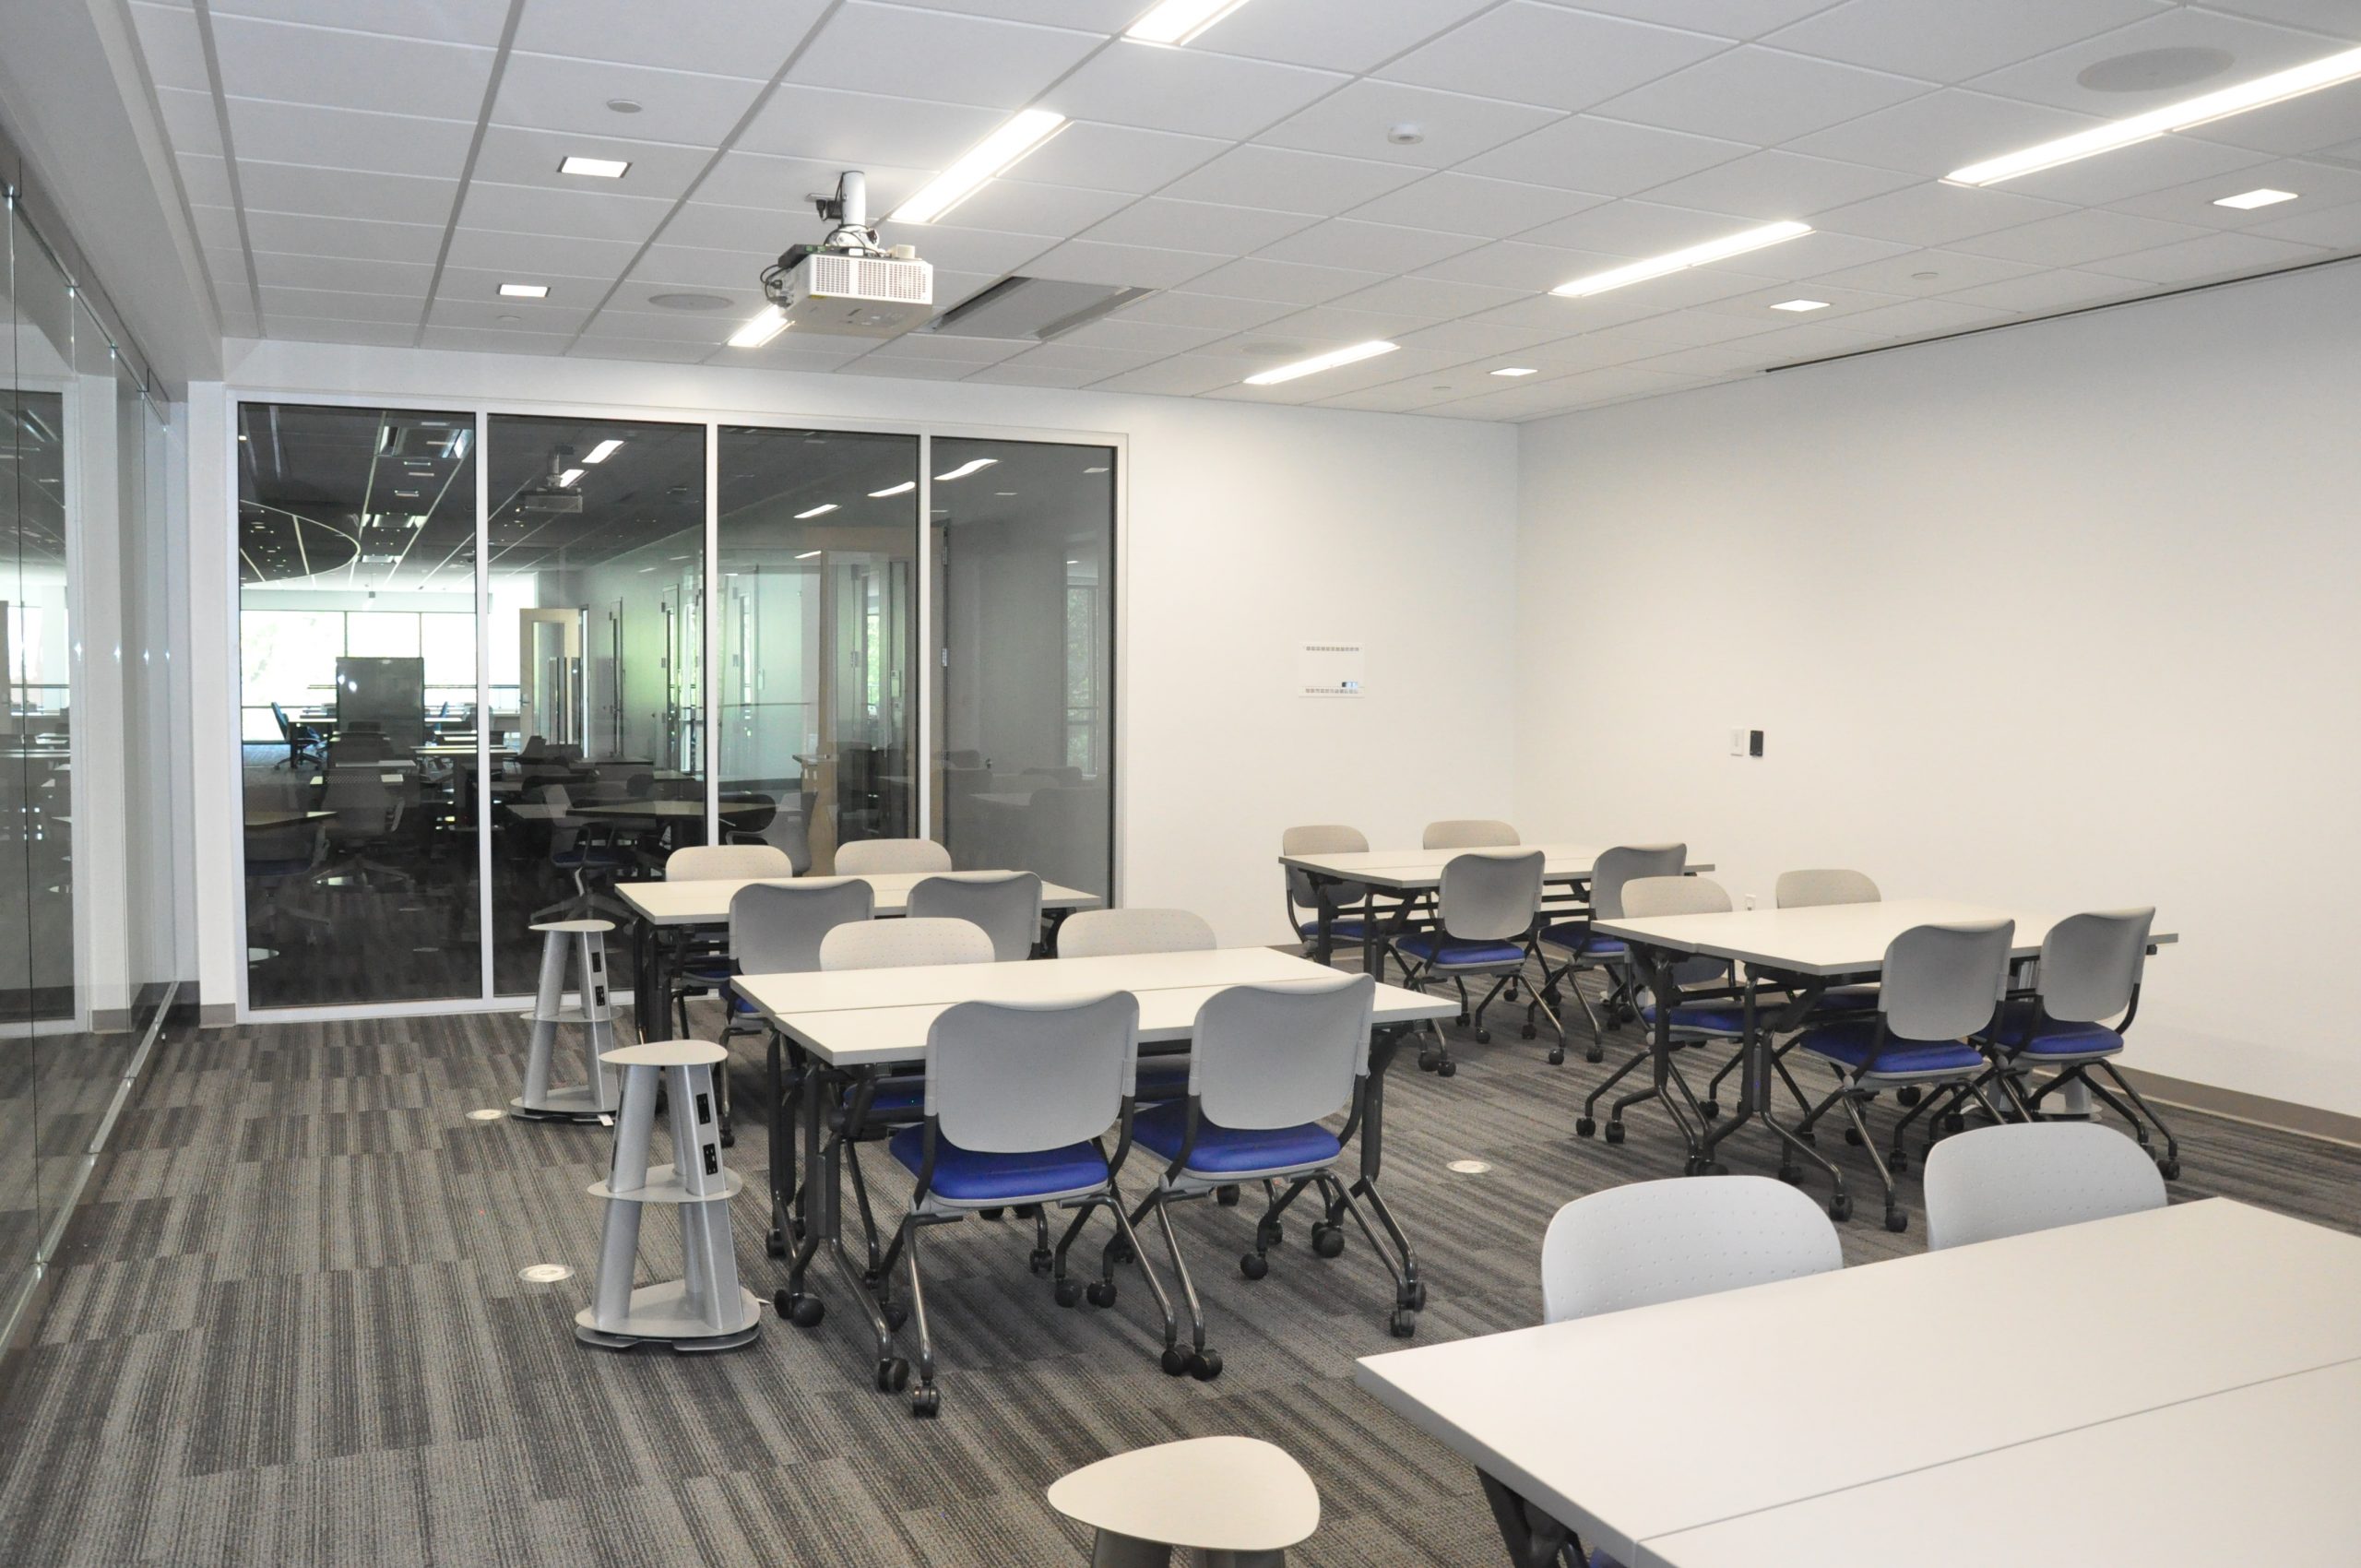 A collaborative workspace in the new Sciences Complex, filled with rolling tables and chairs, as well as many power outlets for devices throughout the room